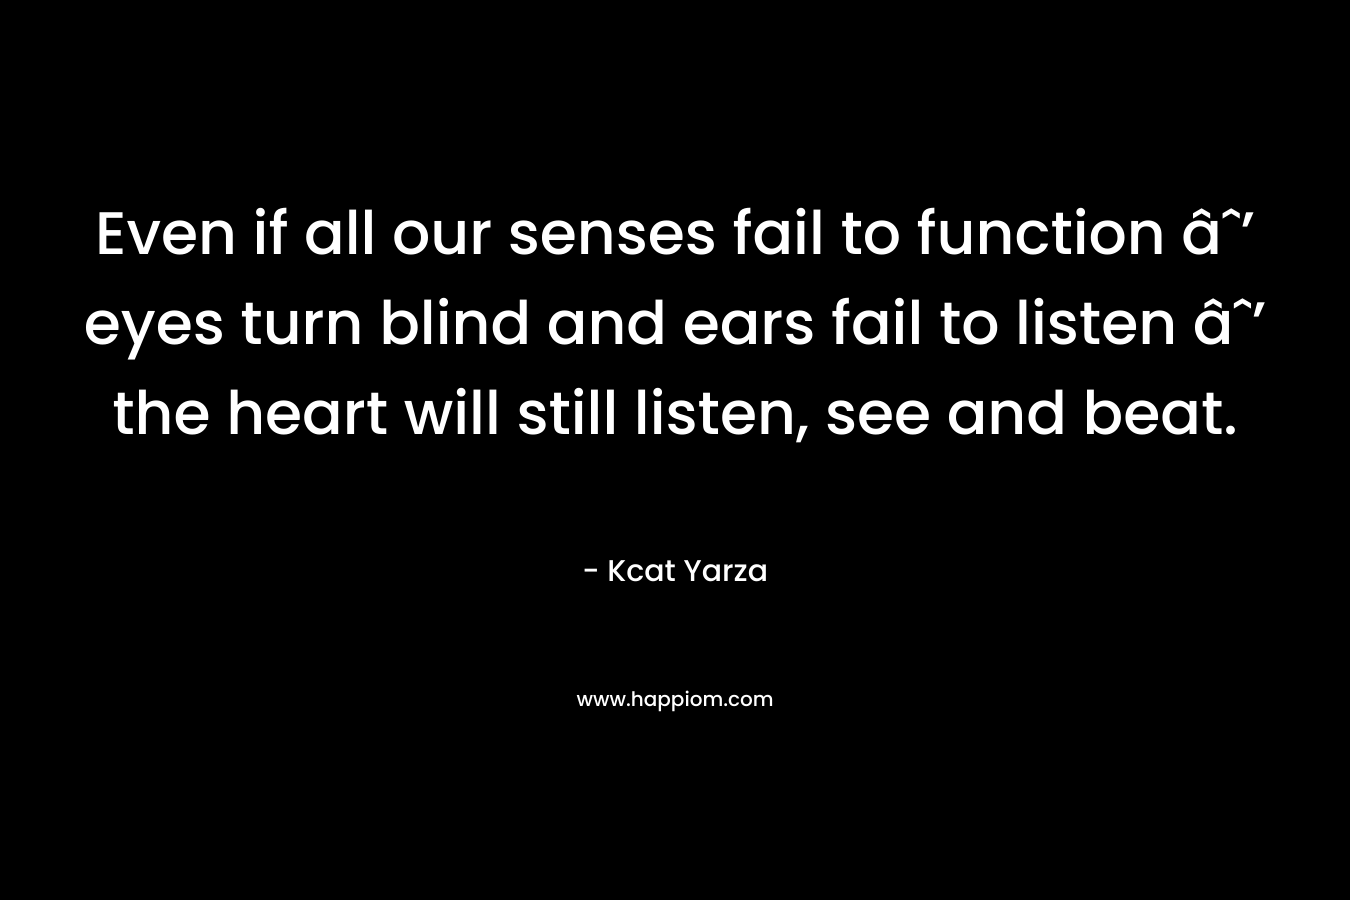 Even if all our senses fail to function âˆ’ eyes turn blind and ears fail to listen âˆ’ the heart will still listen, see and beat. – Kcat Yarza